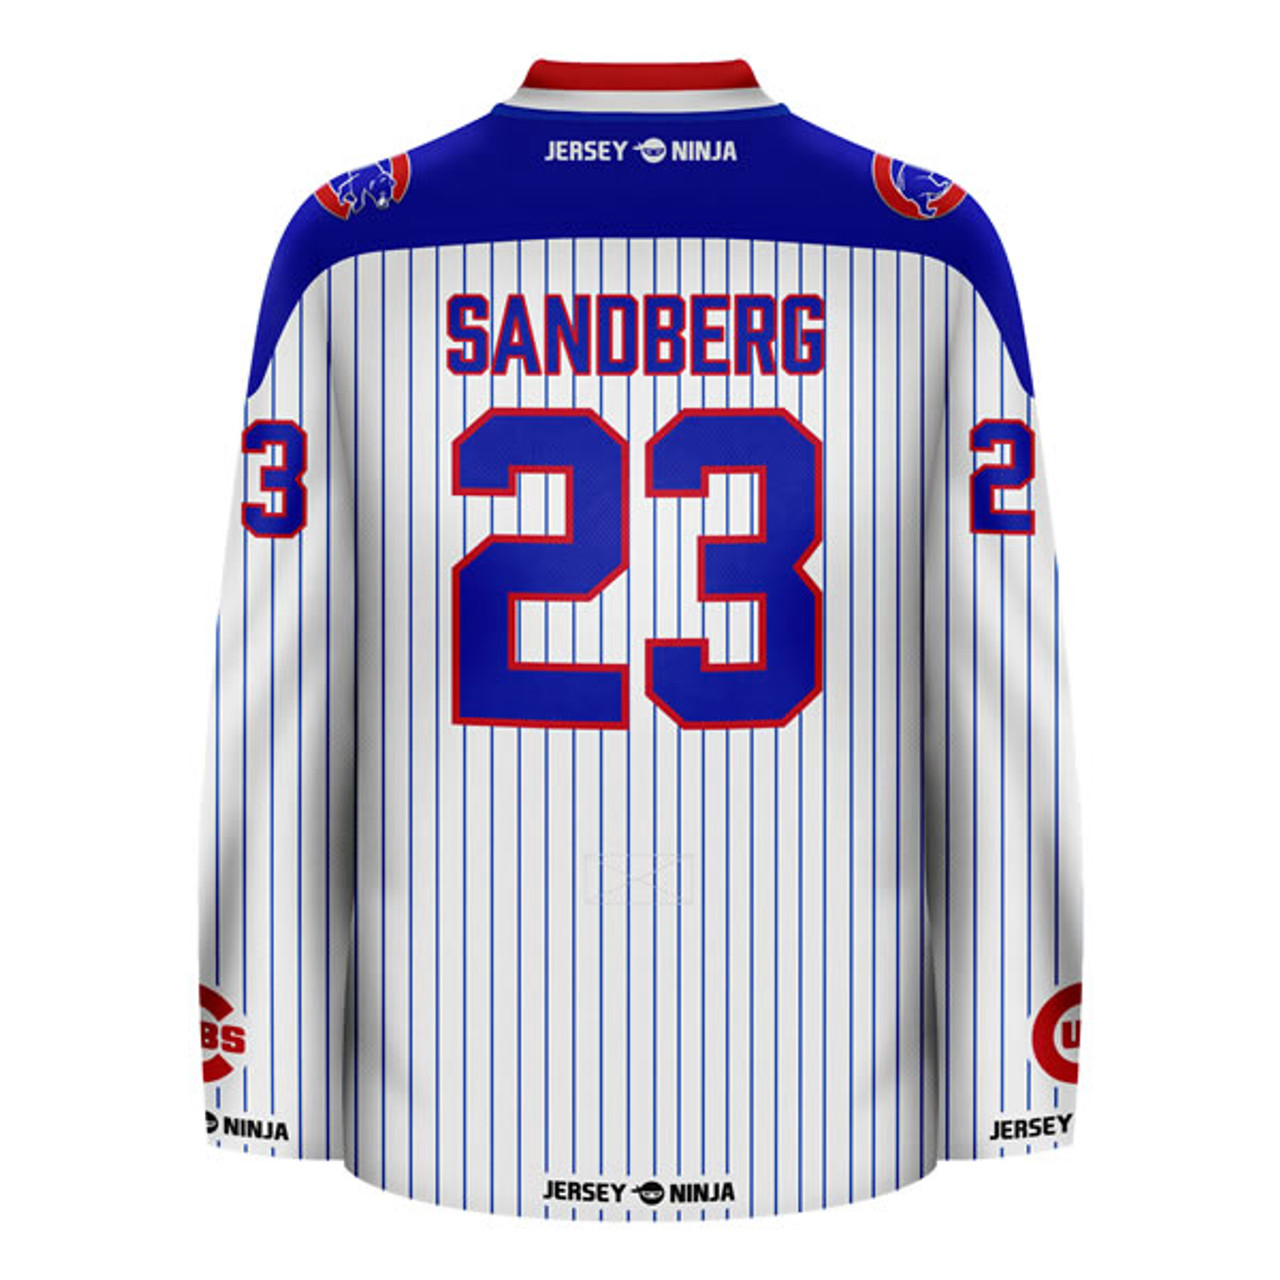 NHL MLB Replica Chicago Cubs Hockey Jerseys. Any name and number you want